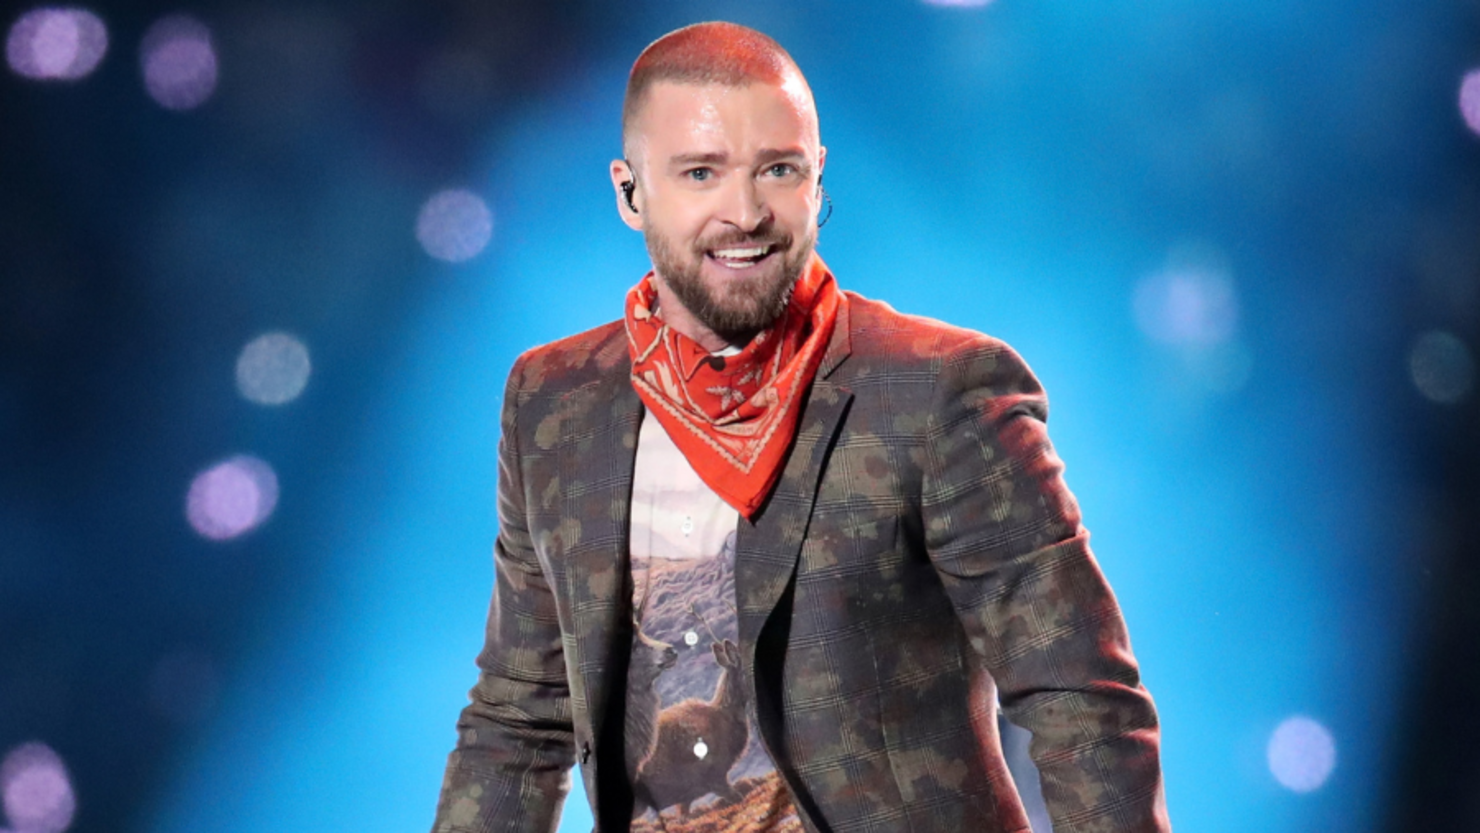 Justin Timberlake Sells His Entire Music Catalog In Lucrative Deal